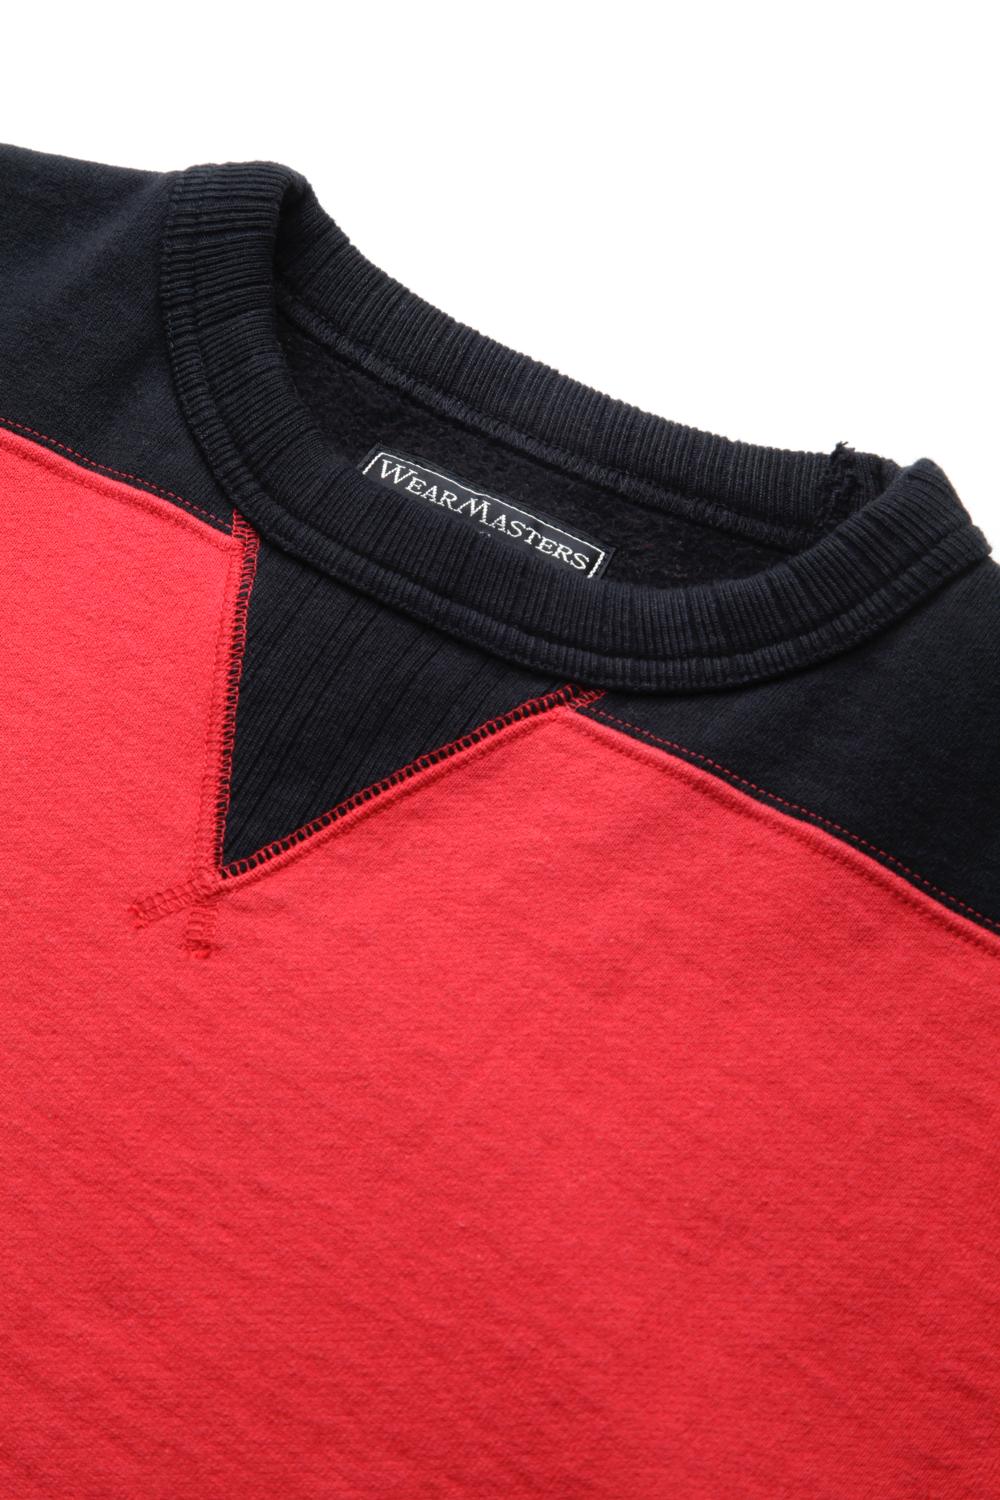 Attractions WEARMASTERS Lot.551 DOUBLE V TWO TONE SWEATSHIRT/RED 